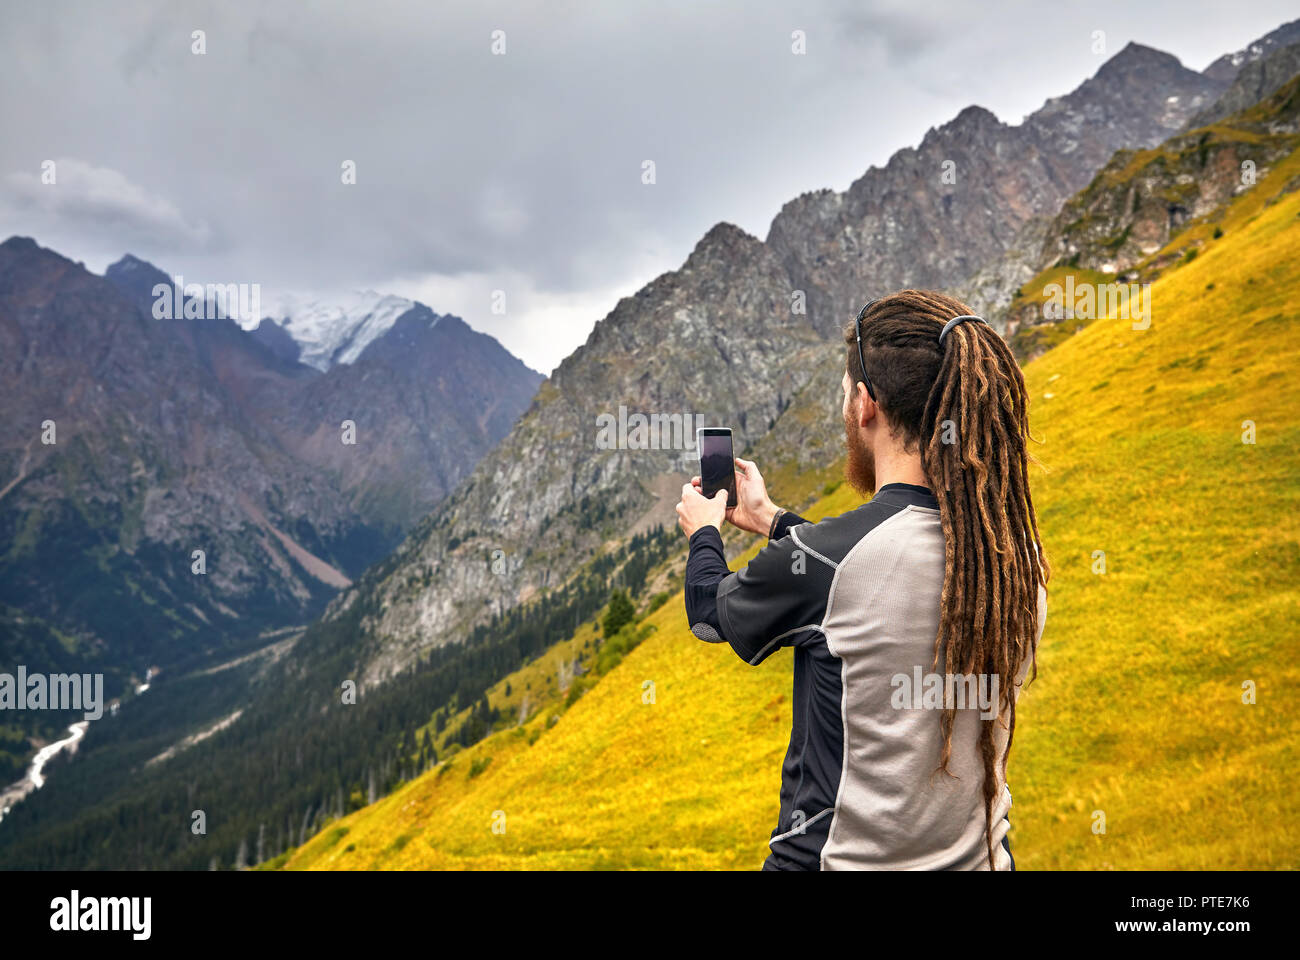 Man with dreadlocks taking photo with his phone in the mountains. Travel Lifestyle concept adventure active vacations outdoor Stock Photo